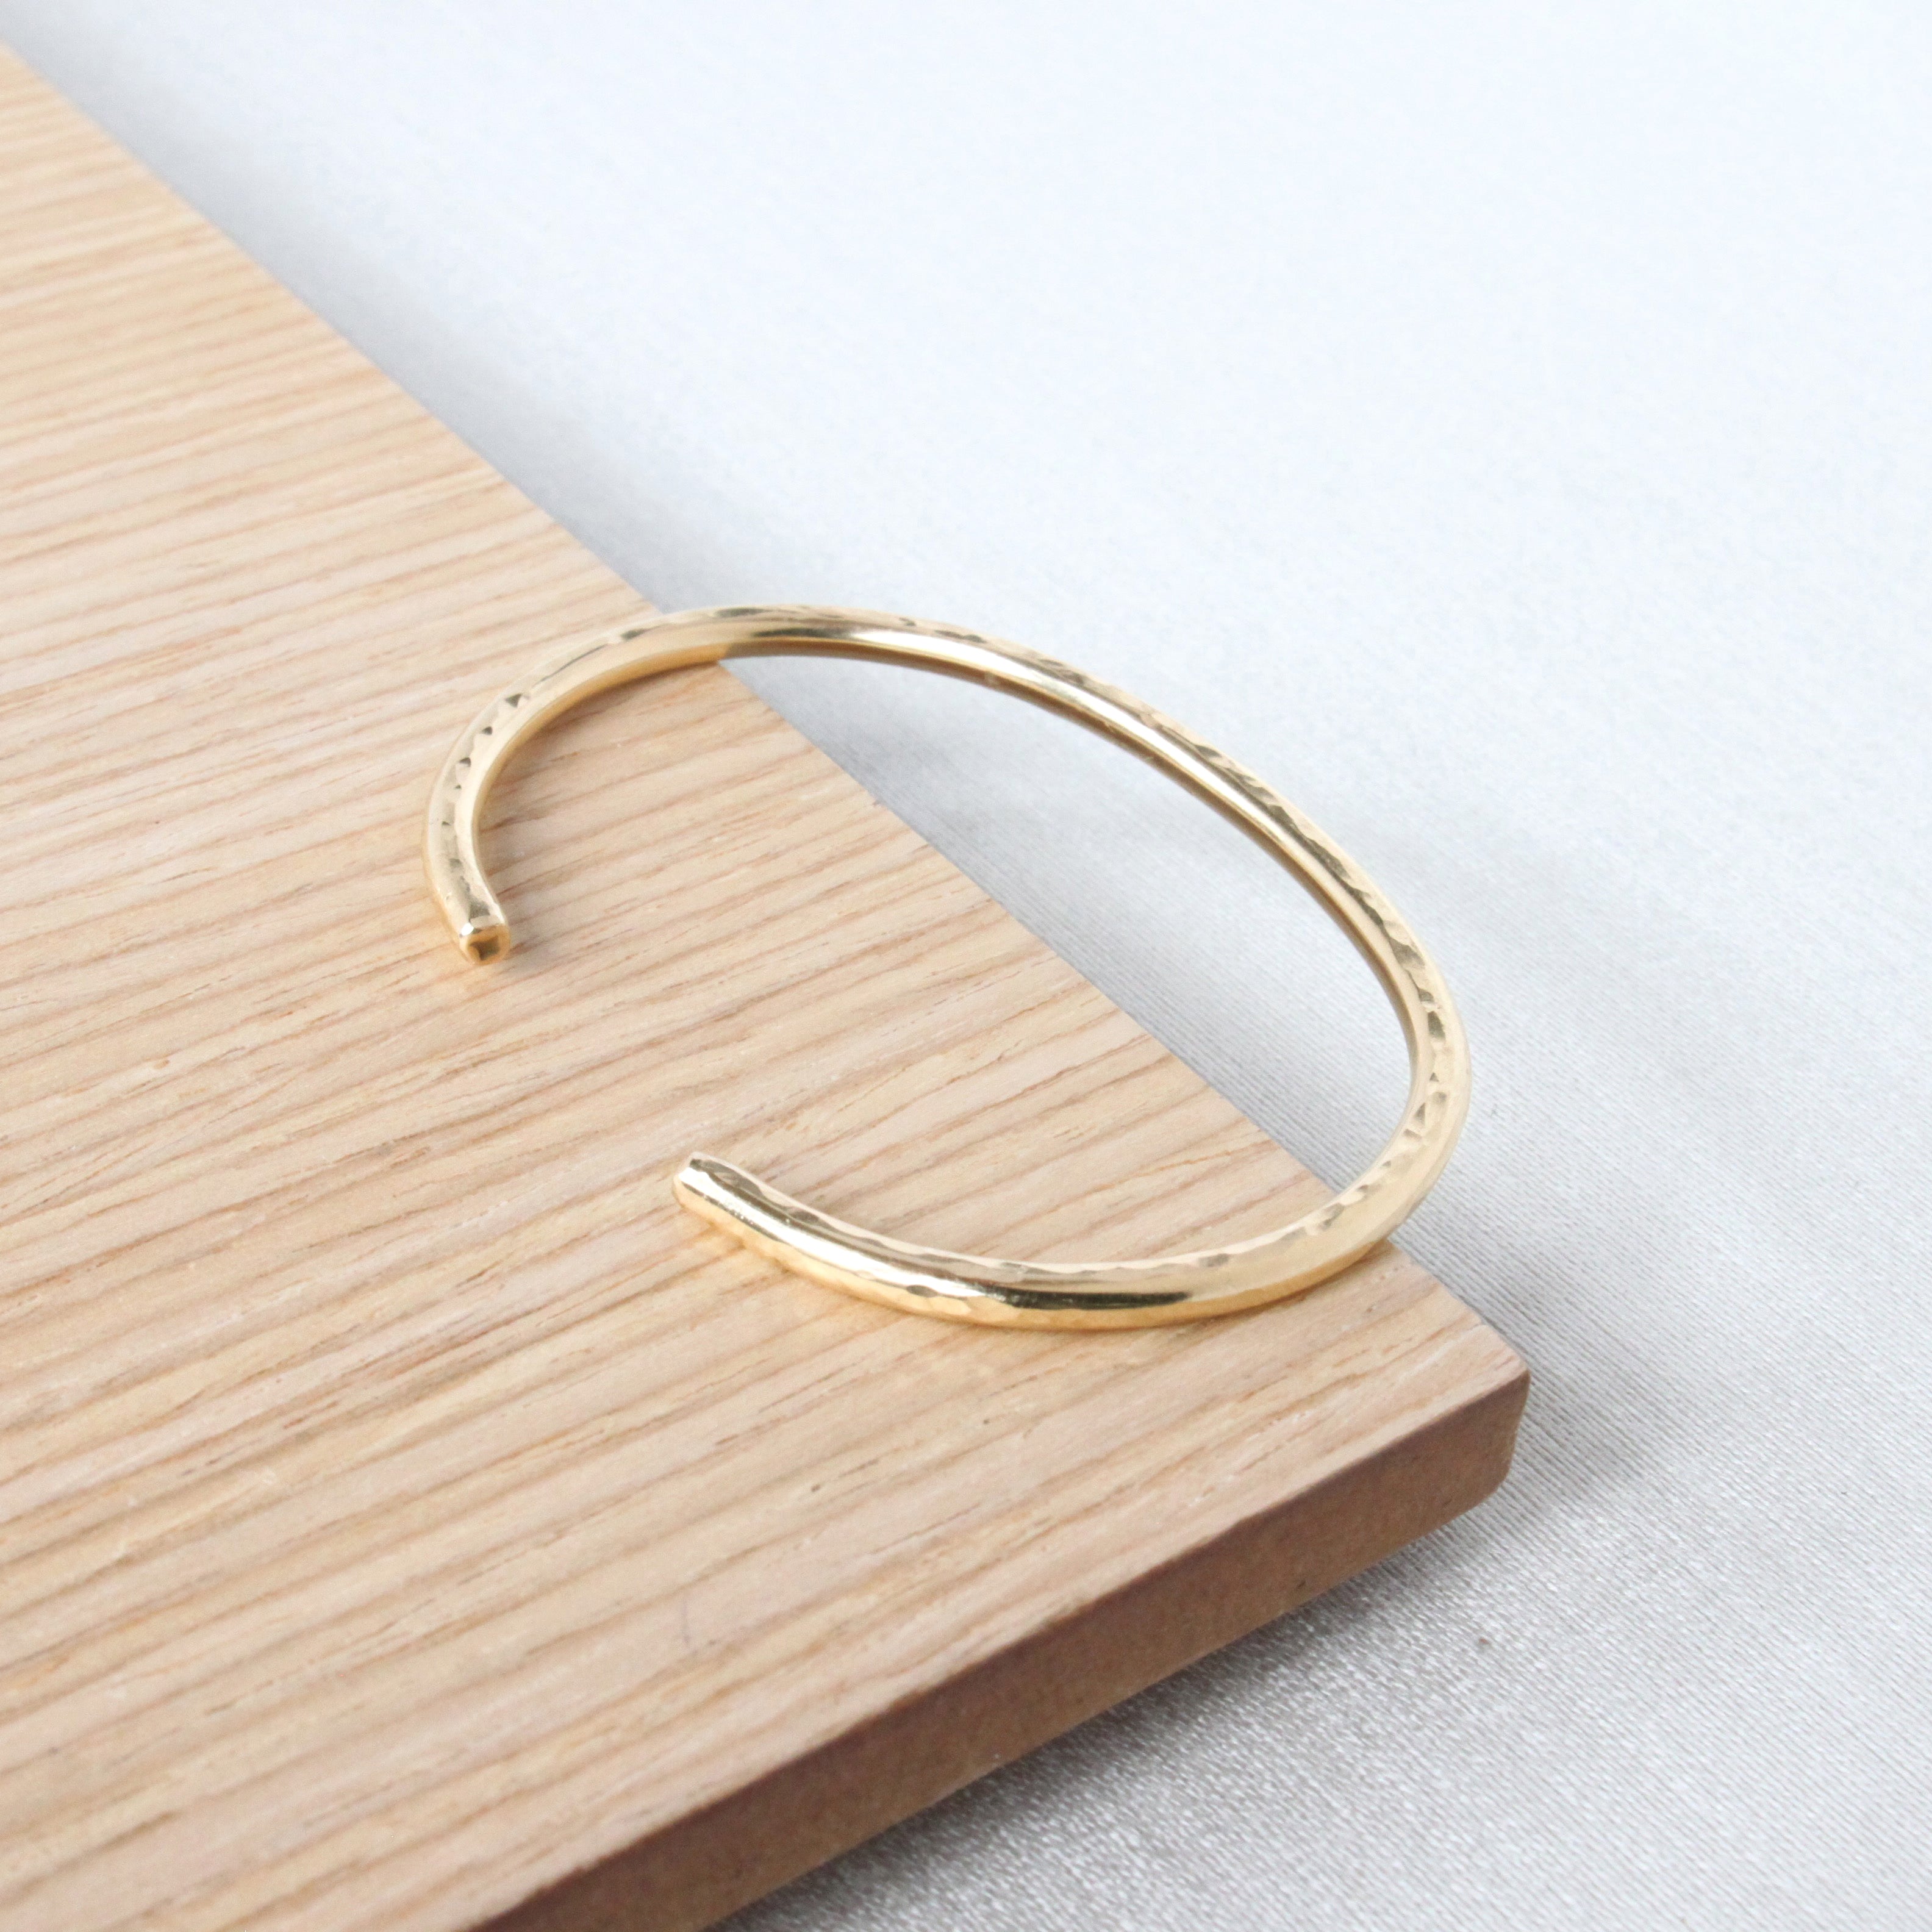 gold cuff bracelet ready to wear everyday. This gold cuff is made with recycled gold and is adjustable. The hand hammered finish is made by hand.